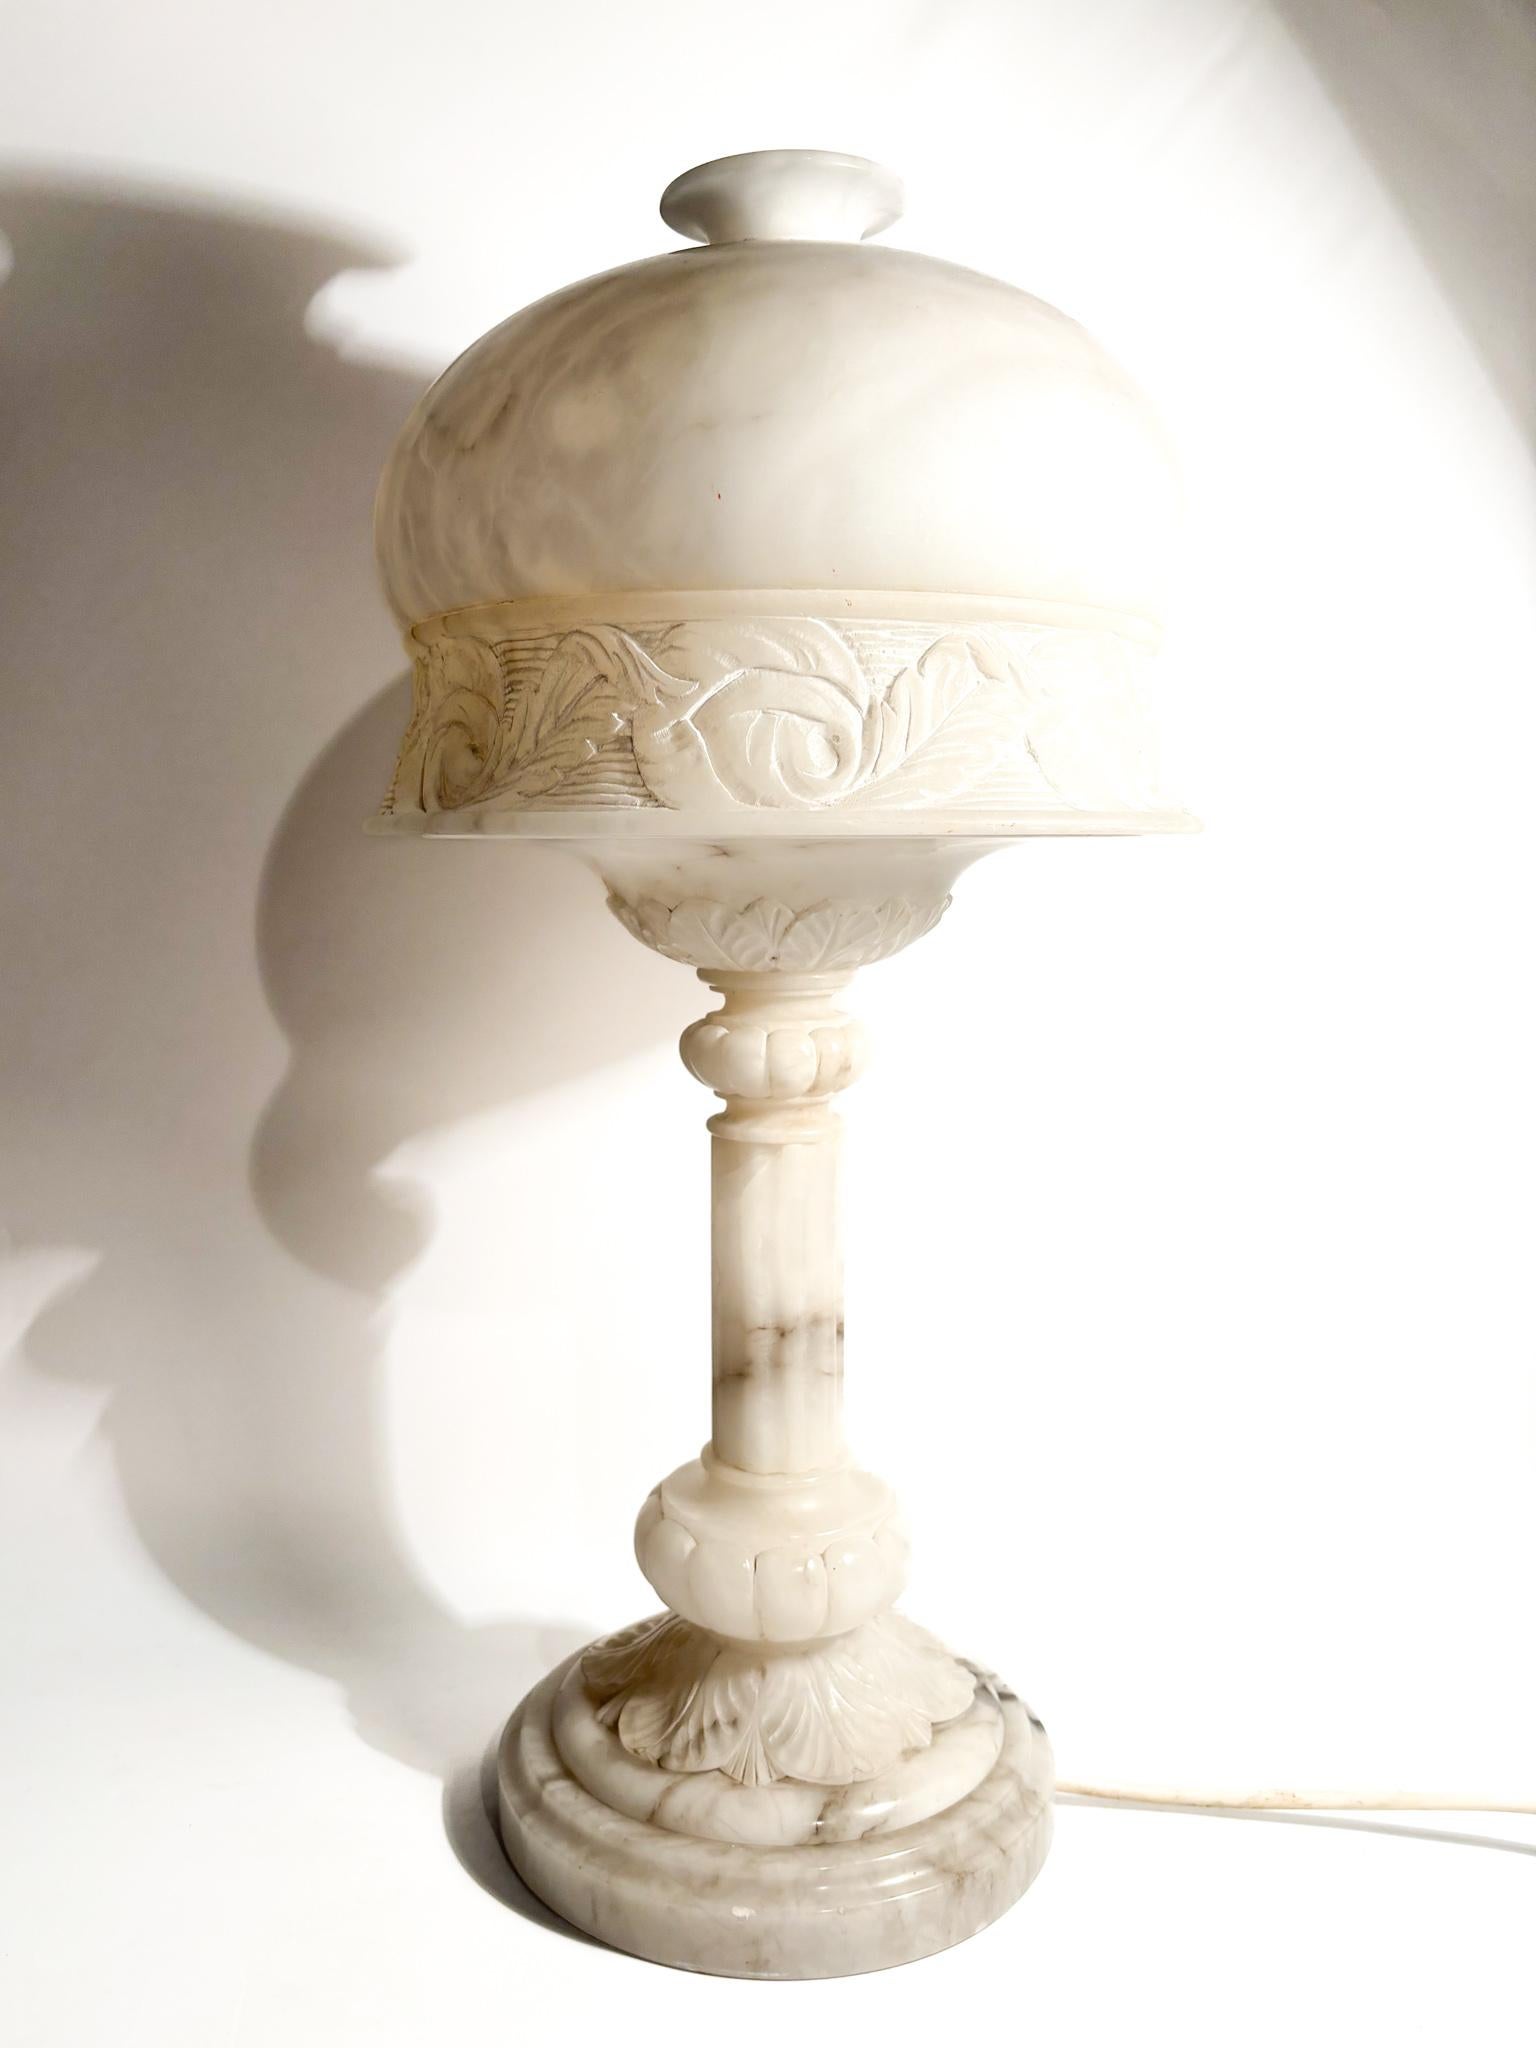 Single-light table lamp in alabaster, decorated in relief, made in the 1950s

Ø 48 cm h 24 cm

Alabaster is a mineral or rock commonly used to carve decorative objects and sculptures. It is a soft and easily workable stone, typically white or light